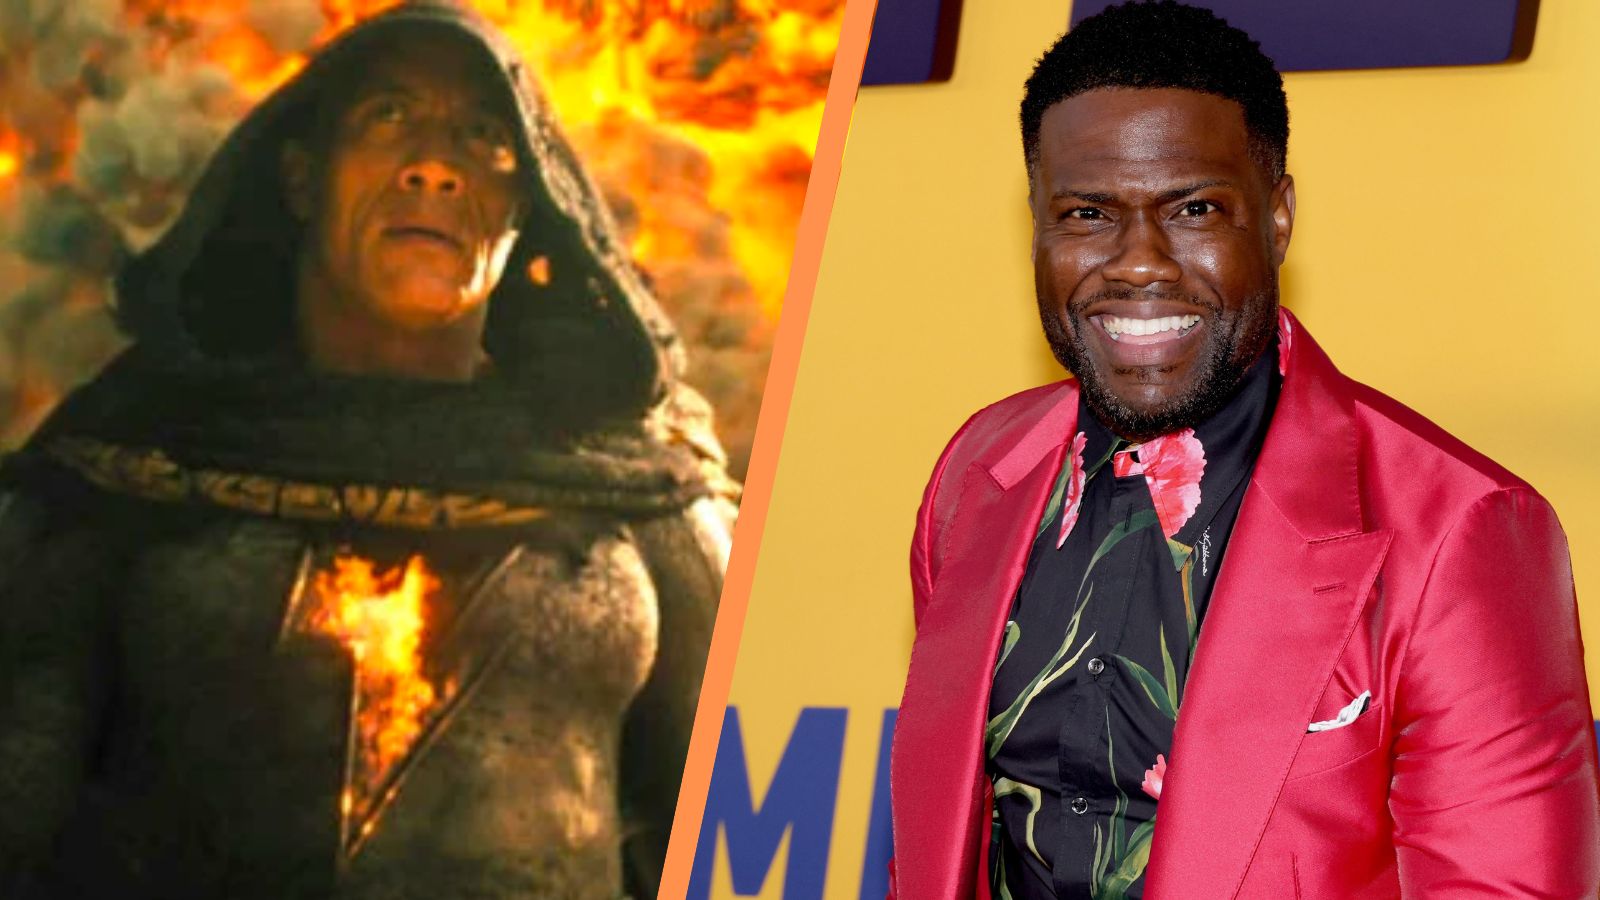 DC fans hilariously pitch 'Black Adam' roles for Kevin Hart.